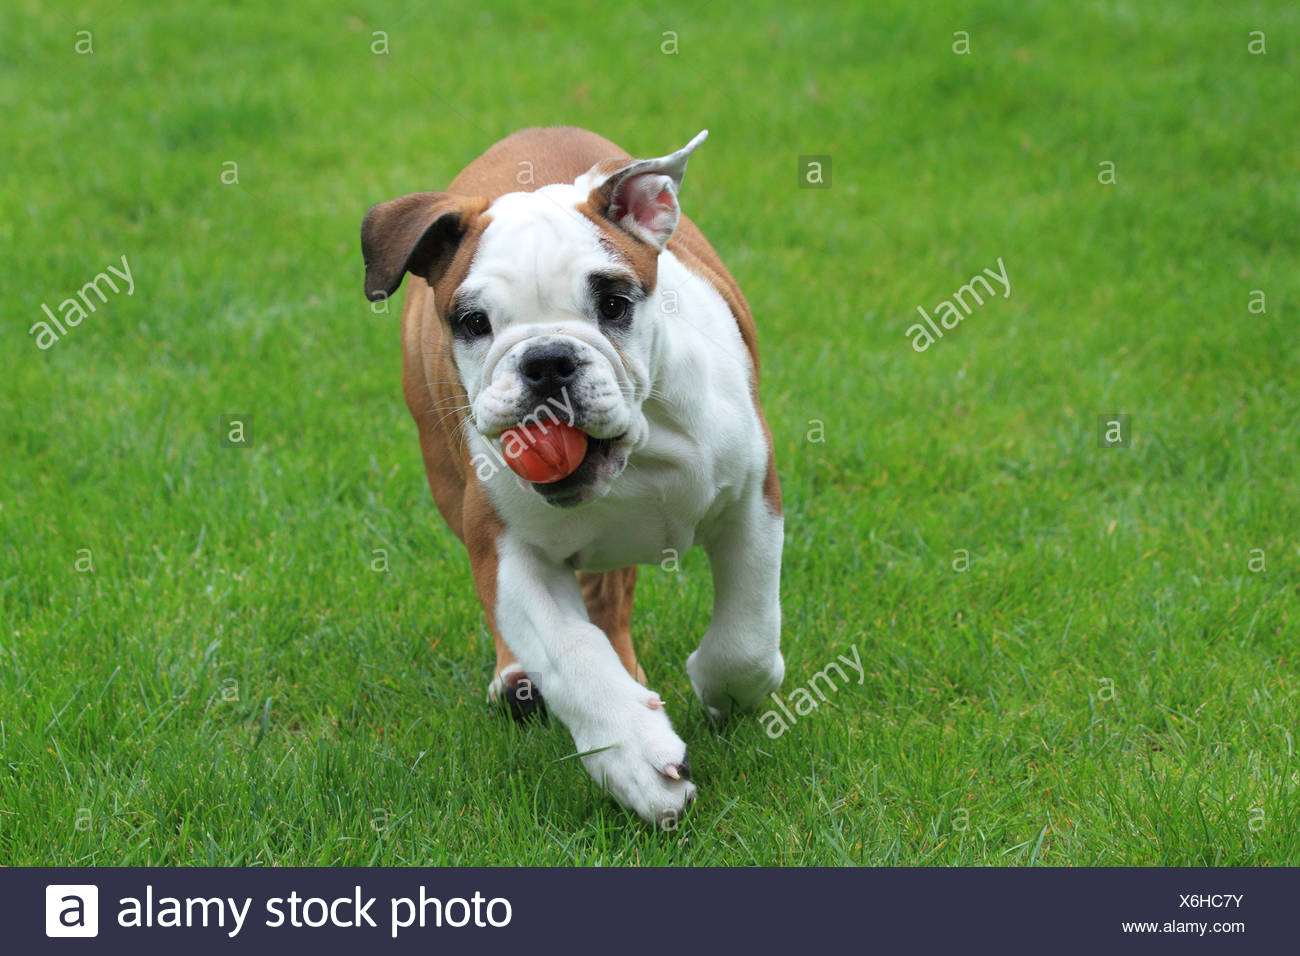 American Bulldog Canis Lupus F Familiaris Young Bulldog Running Over A Lawn Germany Stock Photo Alamy